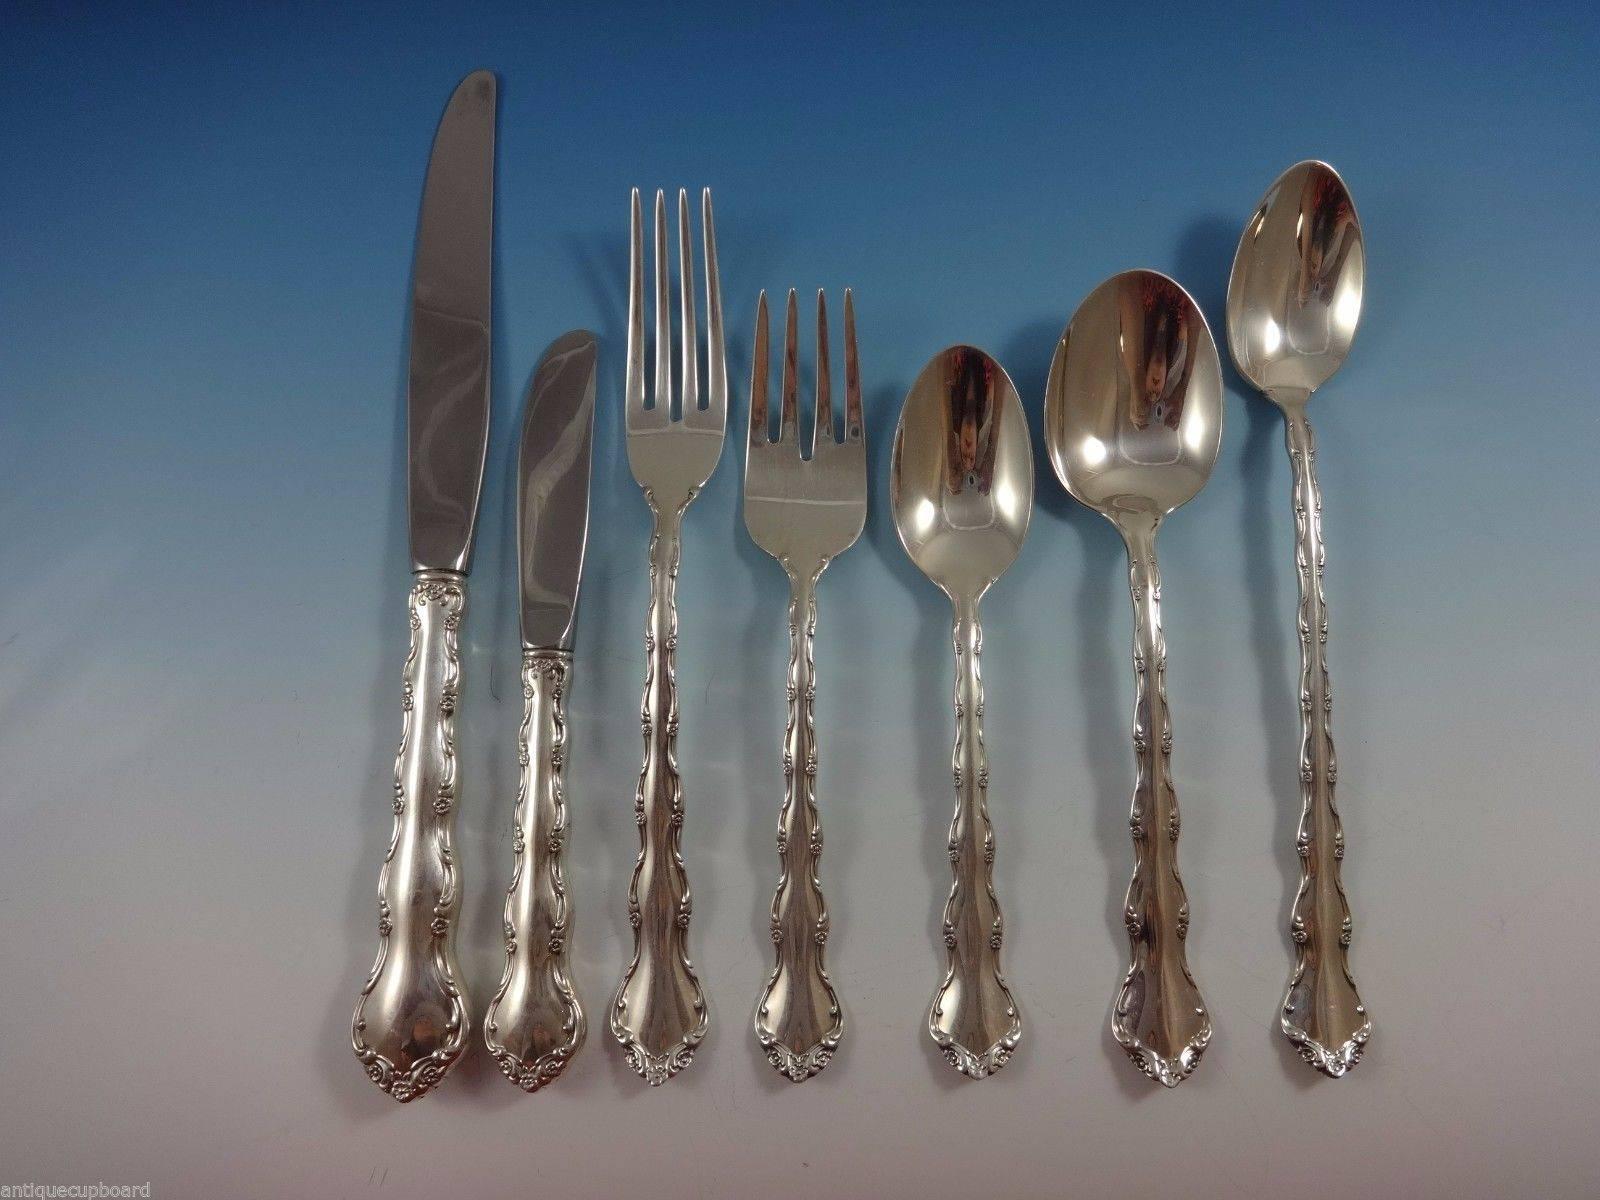 Beautiful Tara by Reed & Barton sterling silver flatware set of 63 pieces. This set includes:

Eight knives, 9 1/8